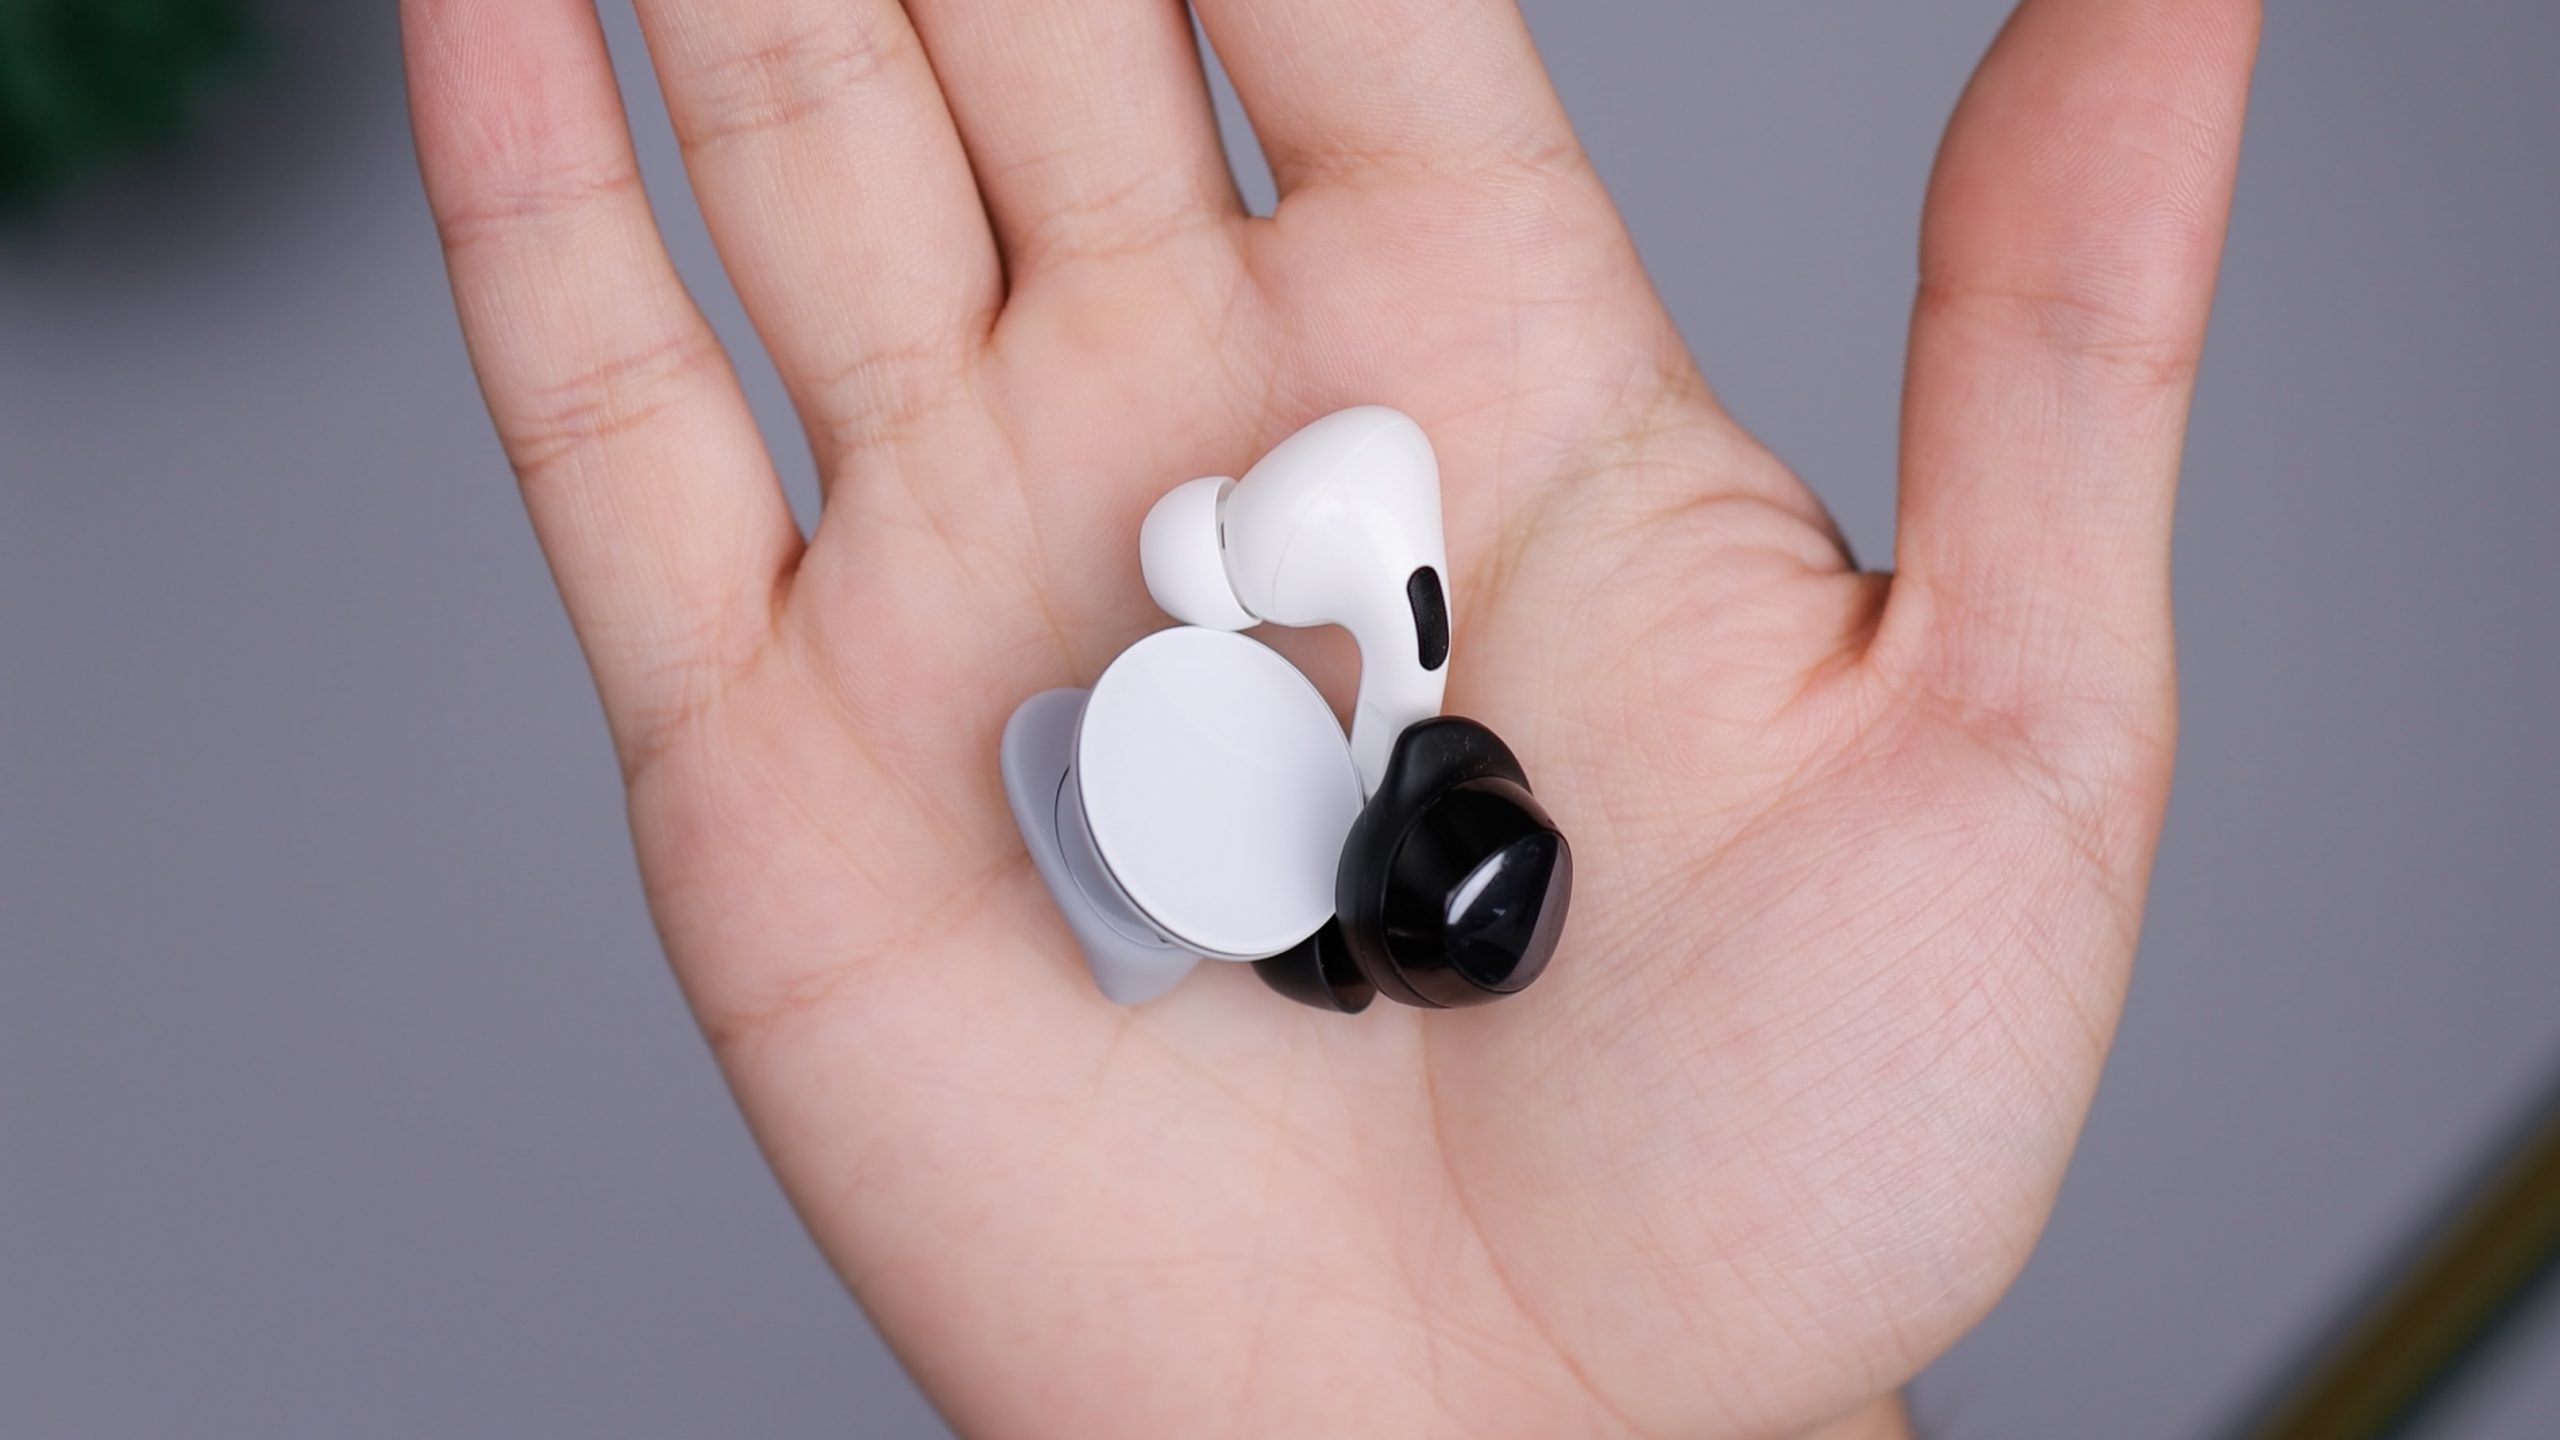 Budget Chinese wireless earbuds erode Apple Airpod dominance